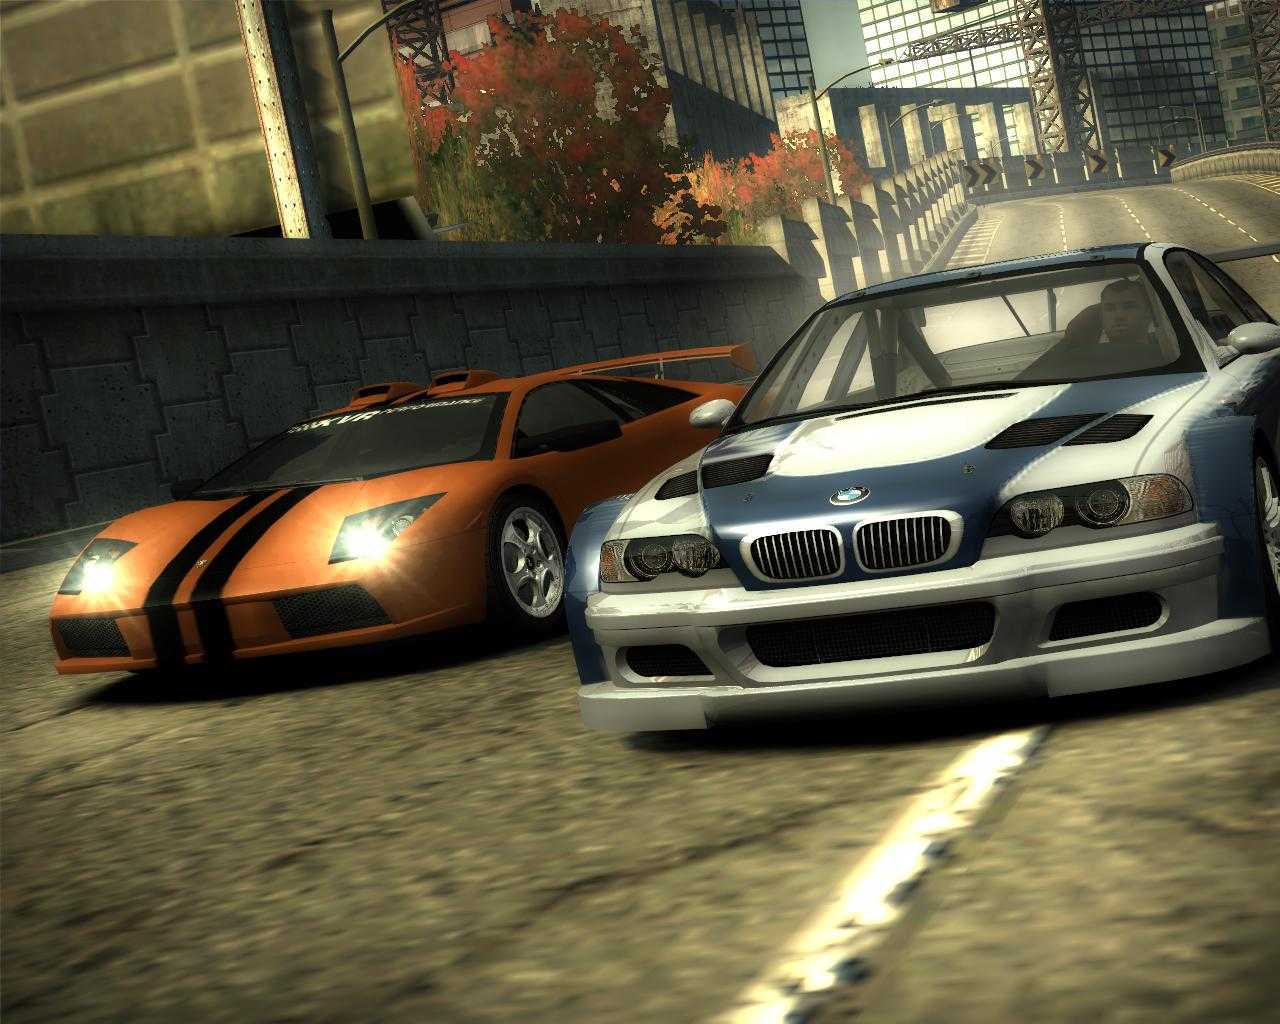 Нид фор СПИД most wanted 2005. Нфс мост вантед 2005. Гонки NFS most wanted. Need for Speed MW 2005. Games need speed most wanted